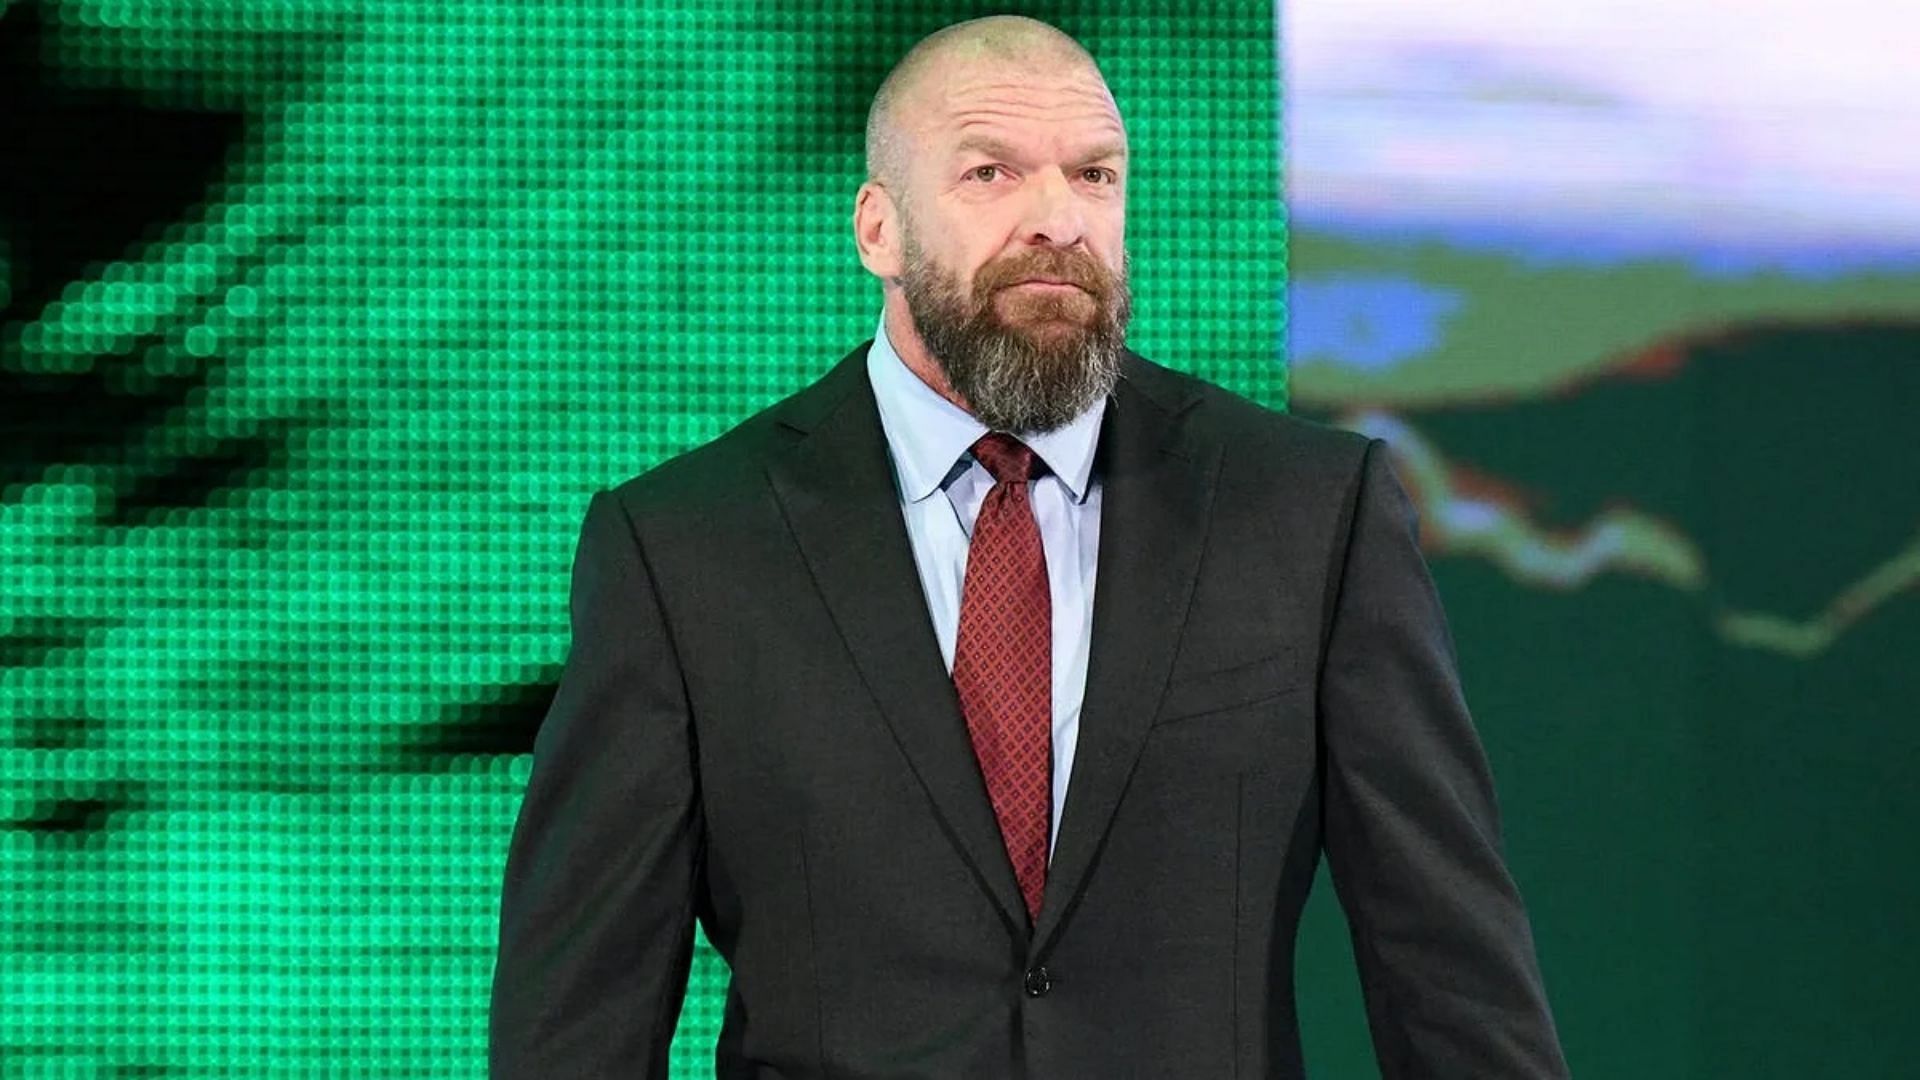 WWE CCO Triple H is a legend of the wrestling business